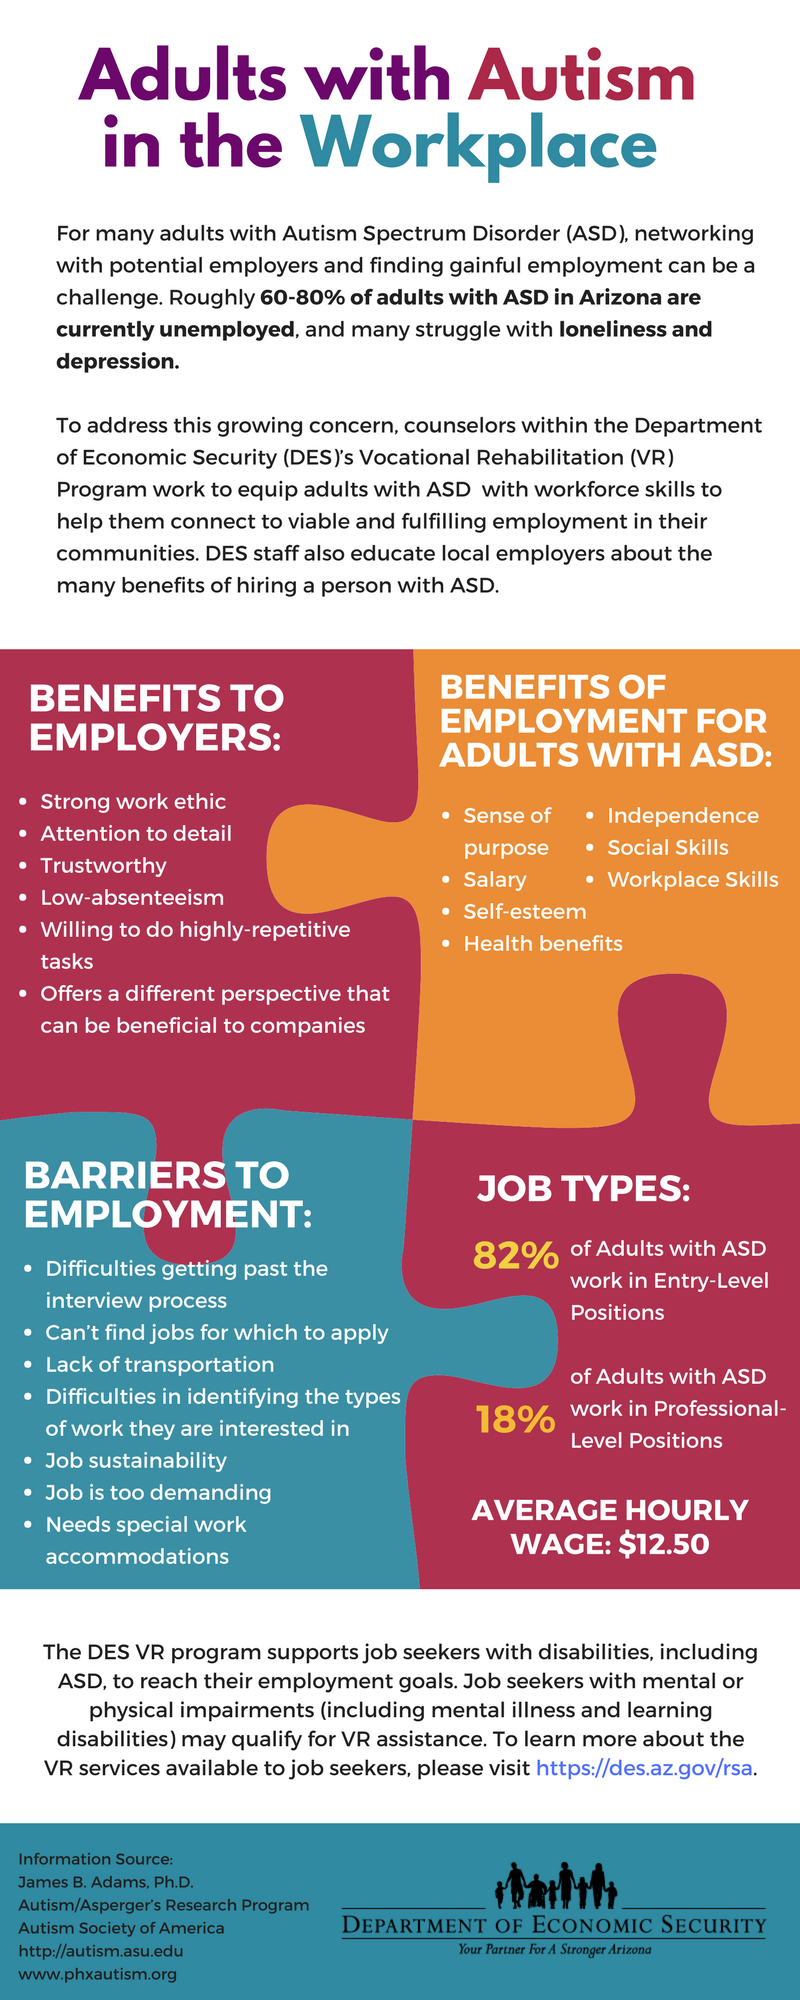 Adults with Autism in the Workplace